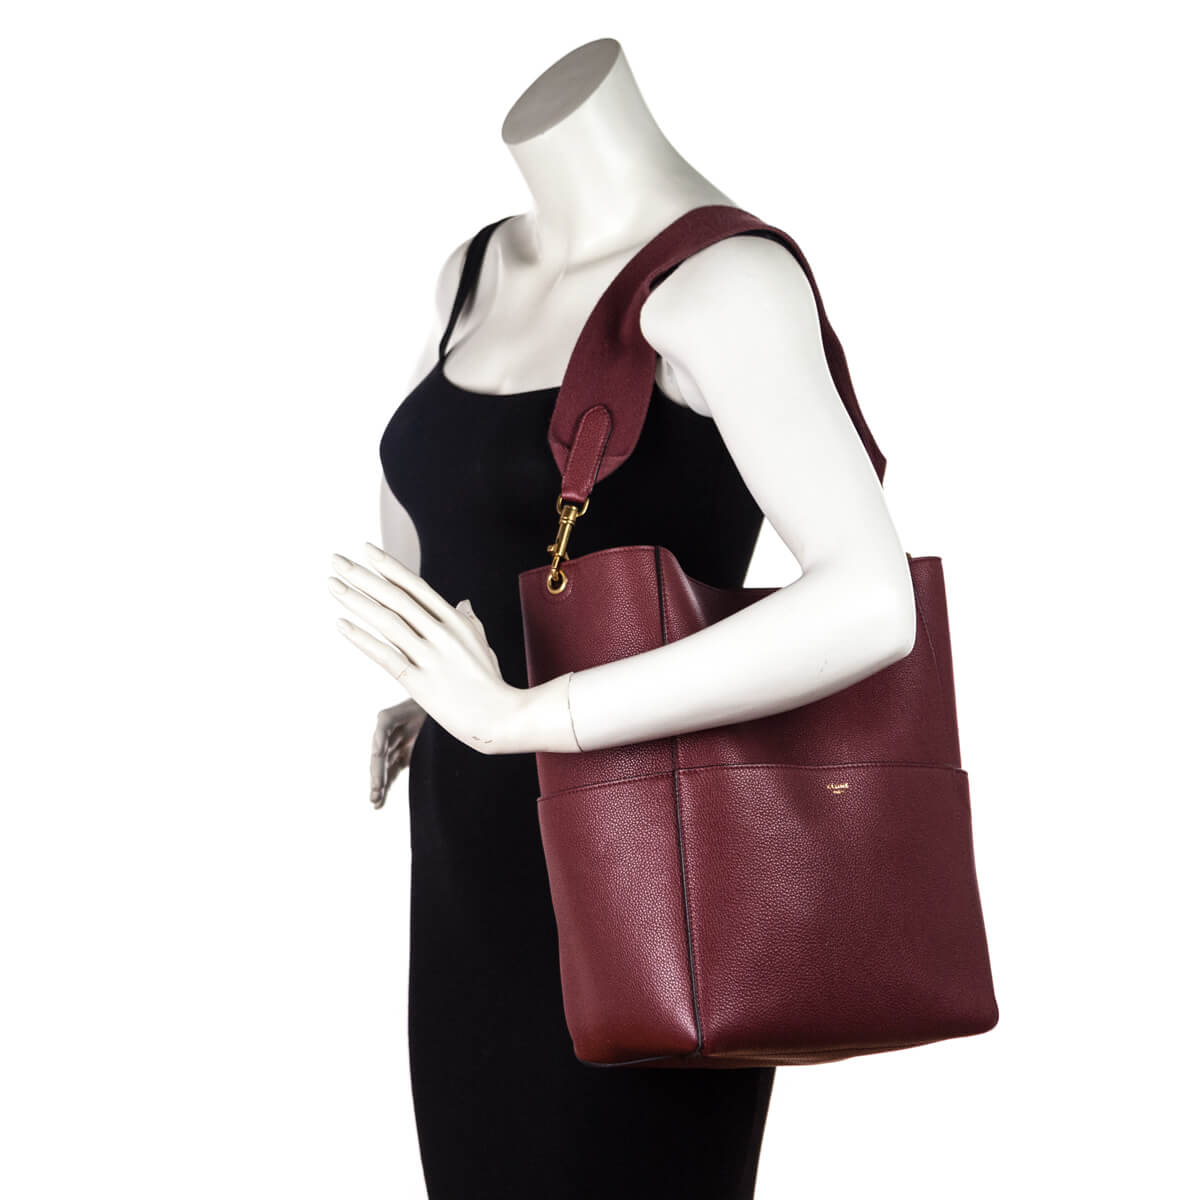 NWT CELINE SANGLE SMALL BUCKET BAG IN RUBY RED SOFT GRAINED